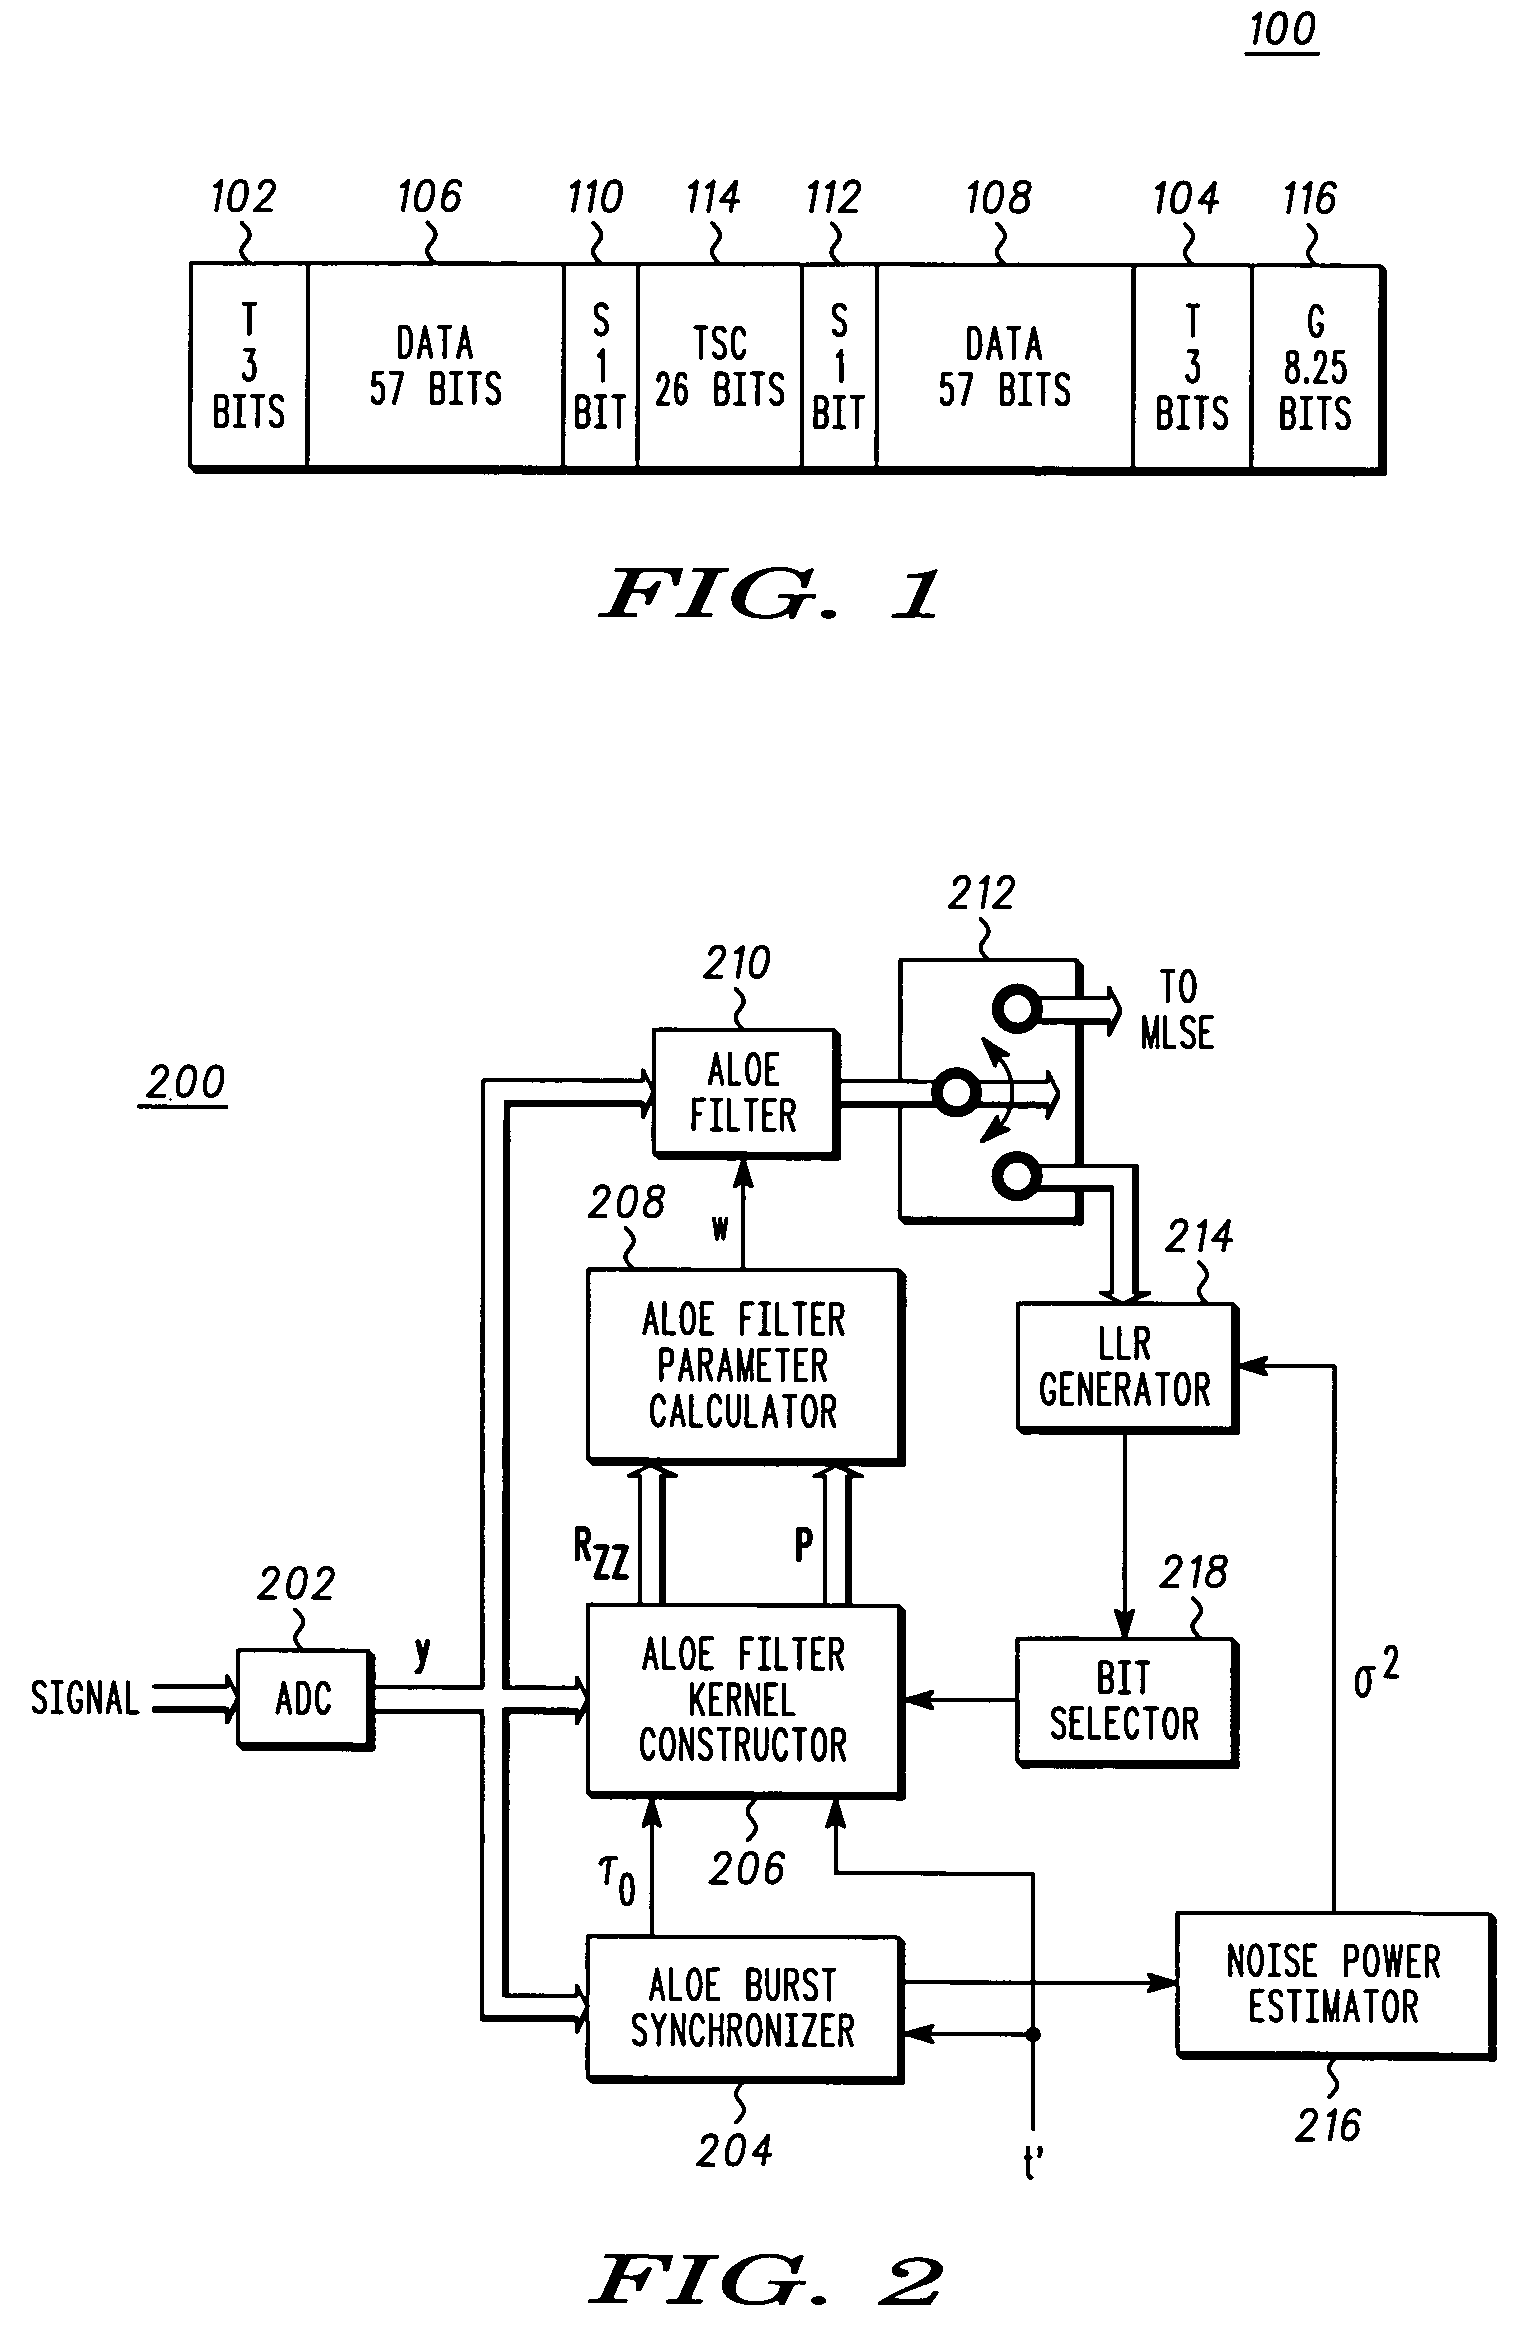 Multi-pass interference reduction in a GSM communication system